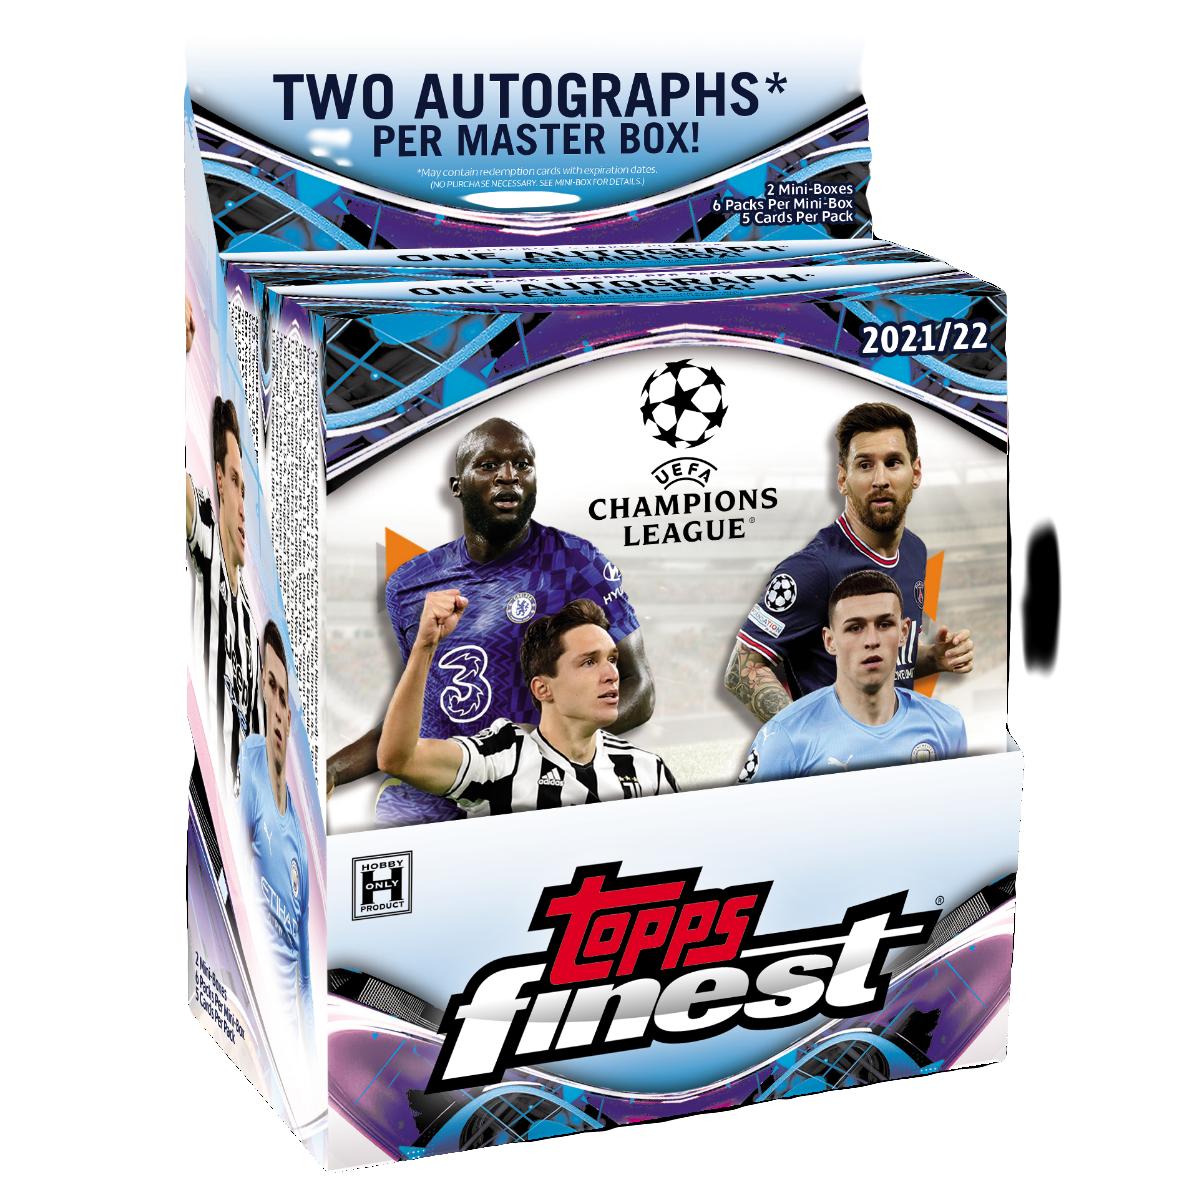 Topps Finest Champions League 2021/22 Hobby